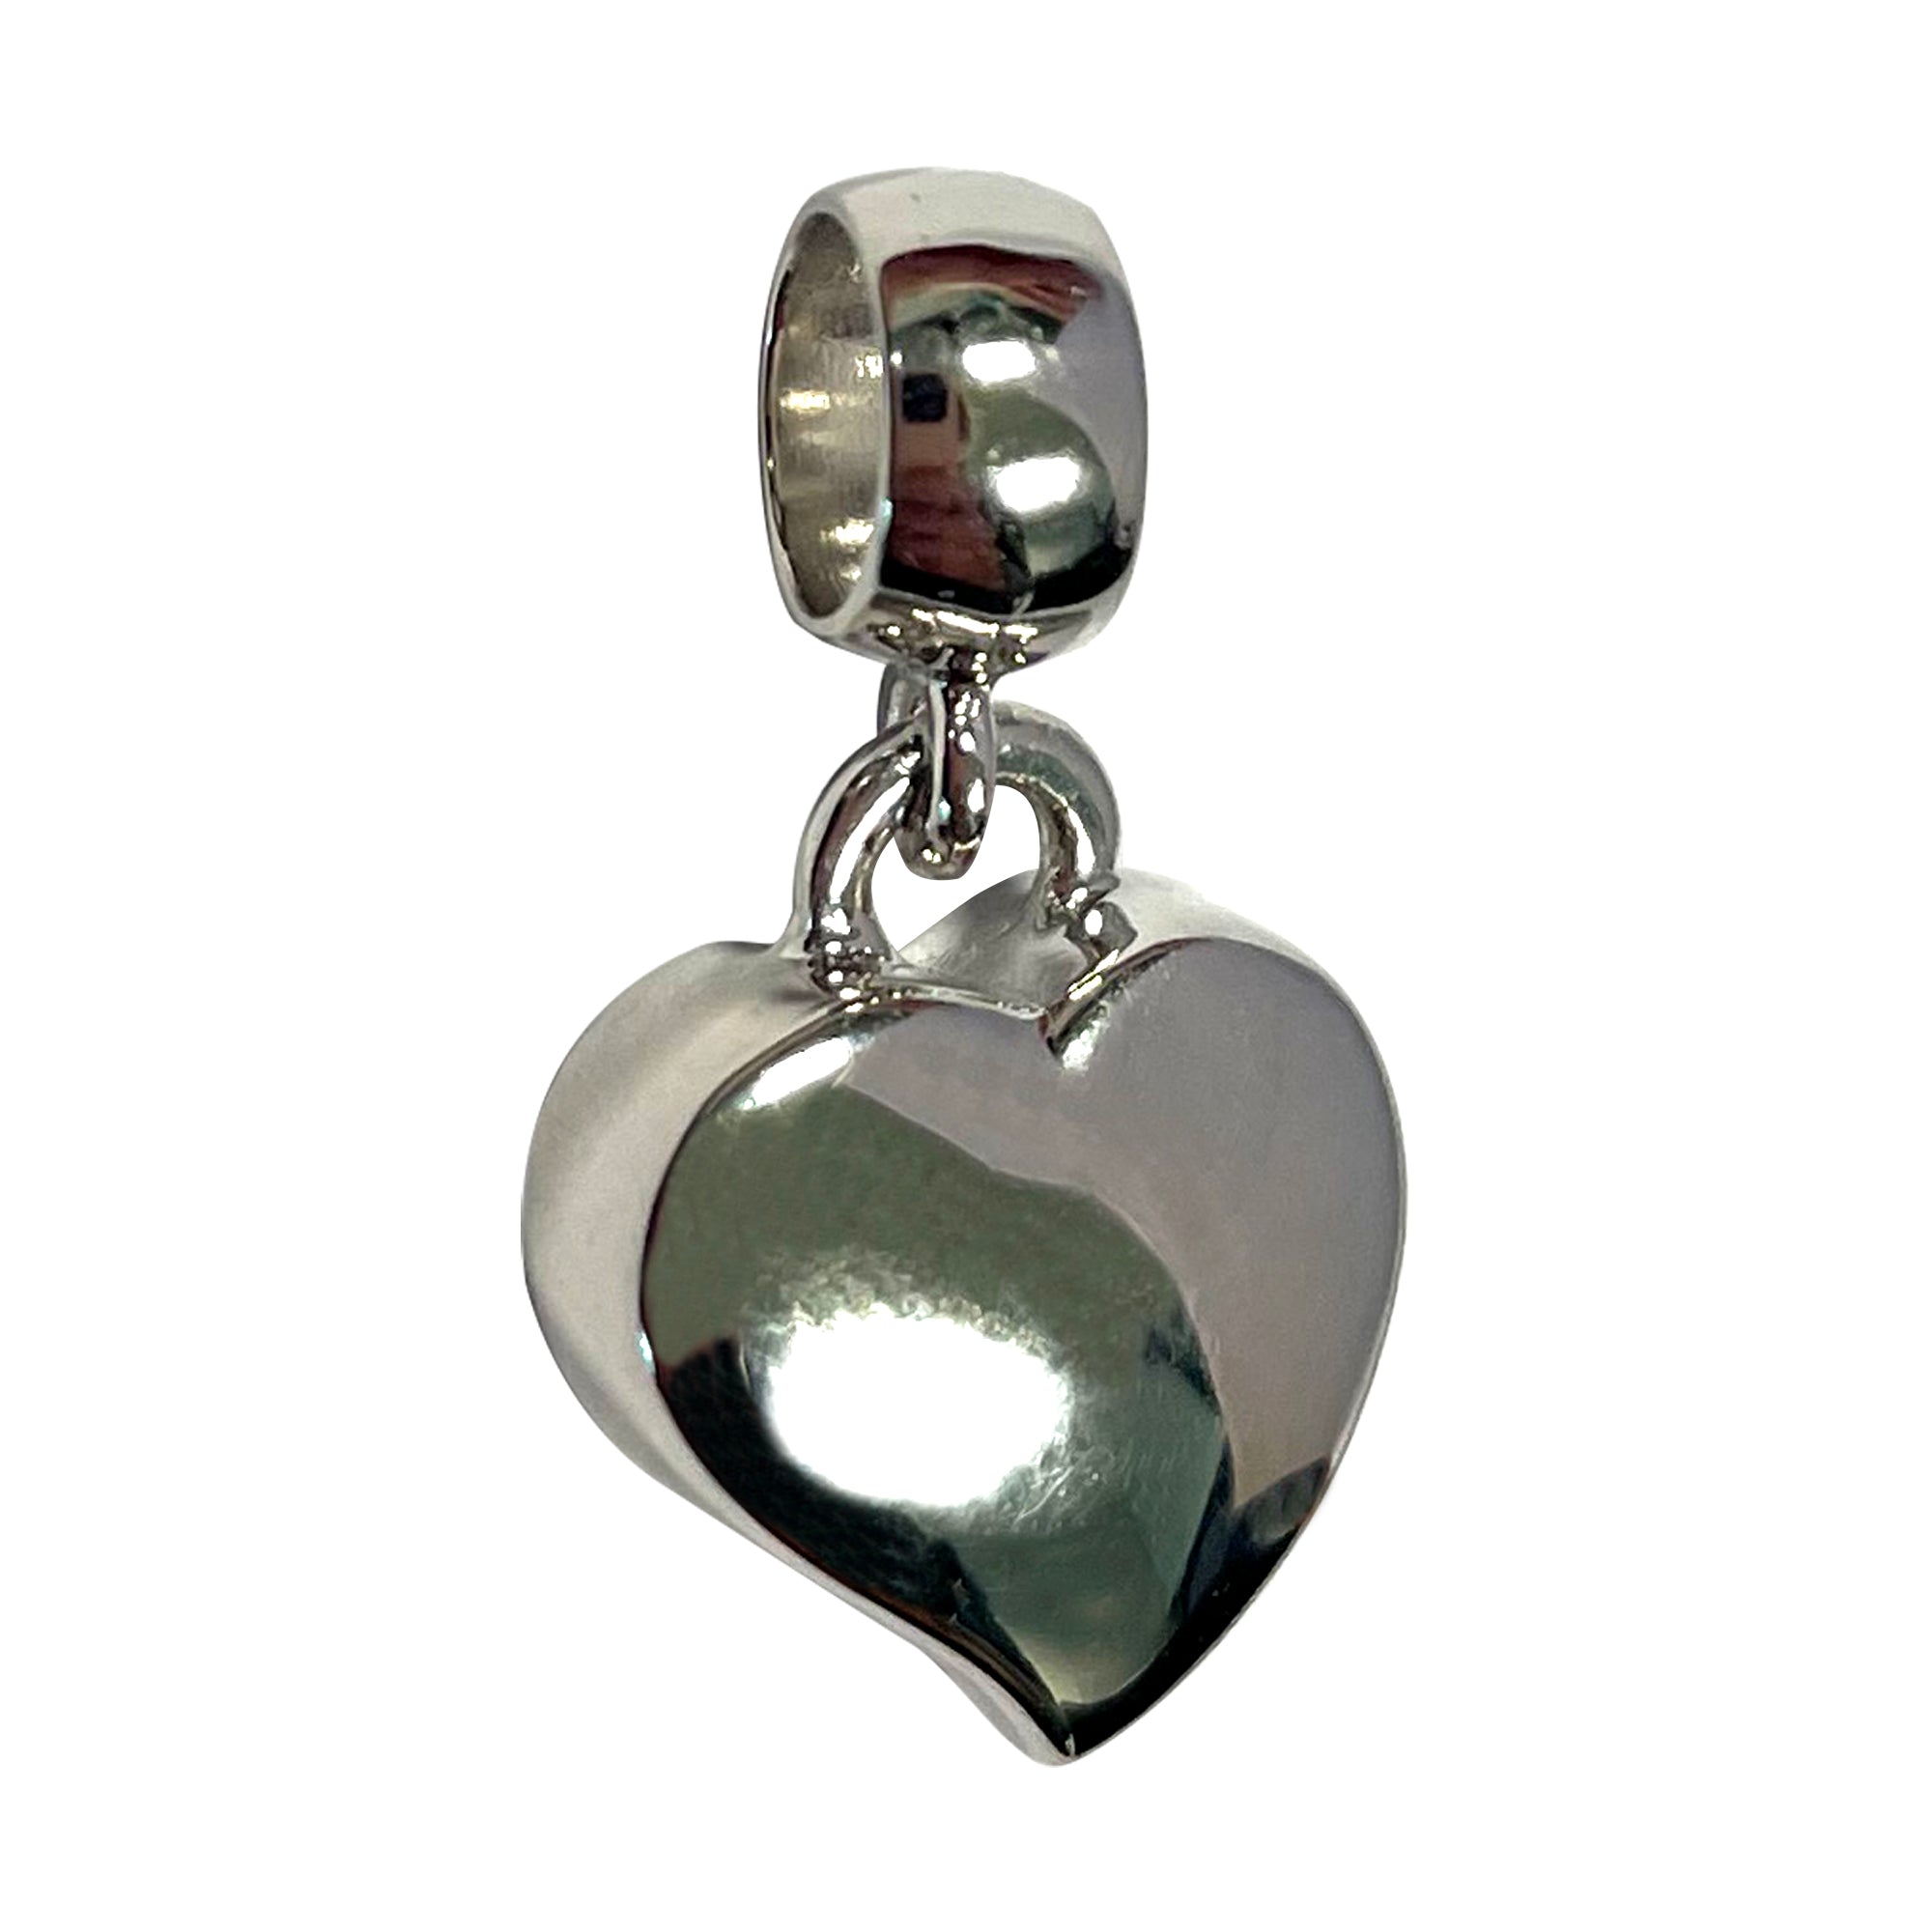 Mayfair Charm Heart Cremation Ashes Pendant 925 Silver